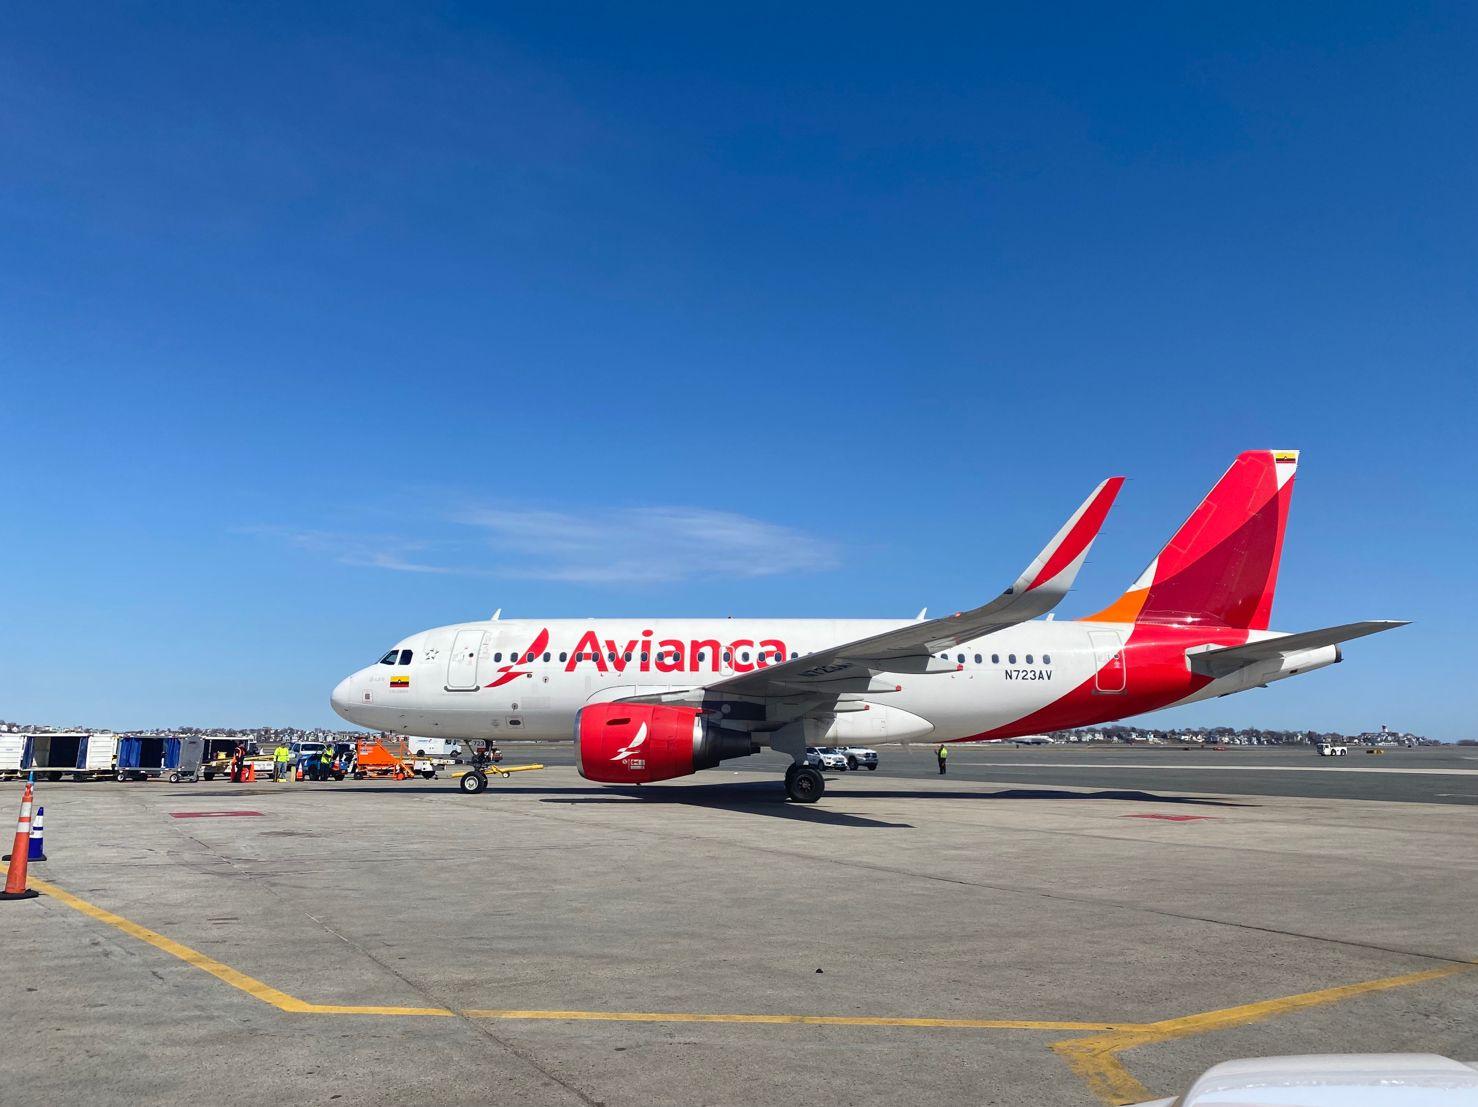 Avianca Inaugurates Flights To Boston And Continues Grow In The